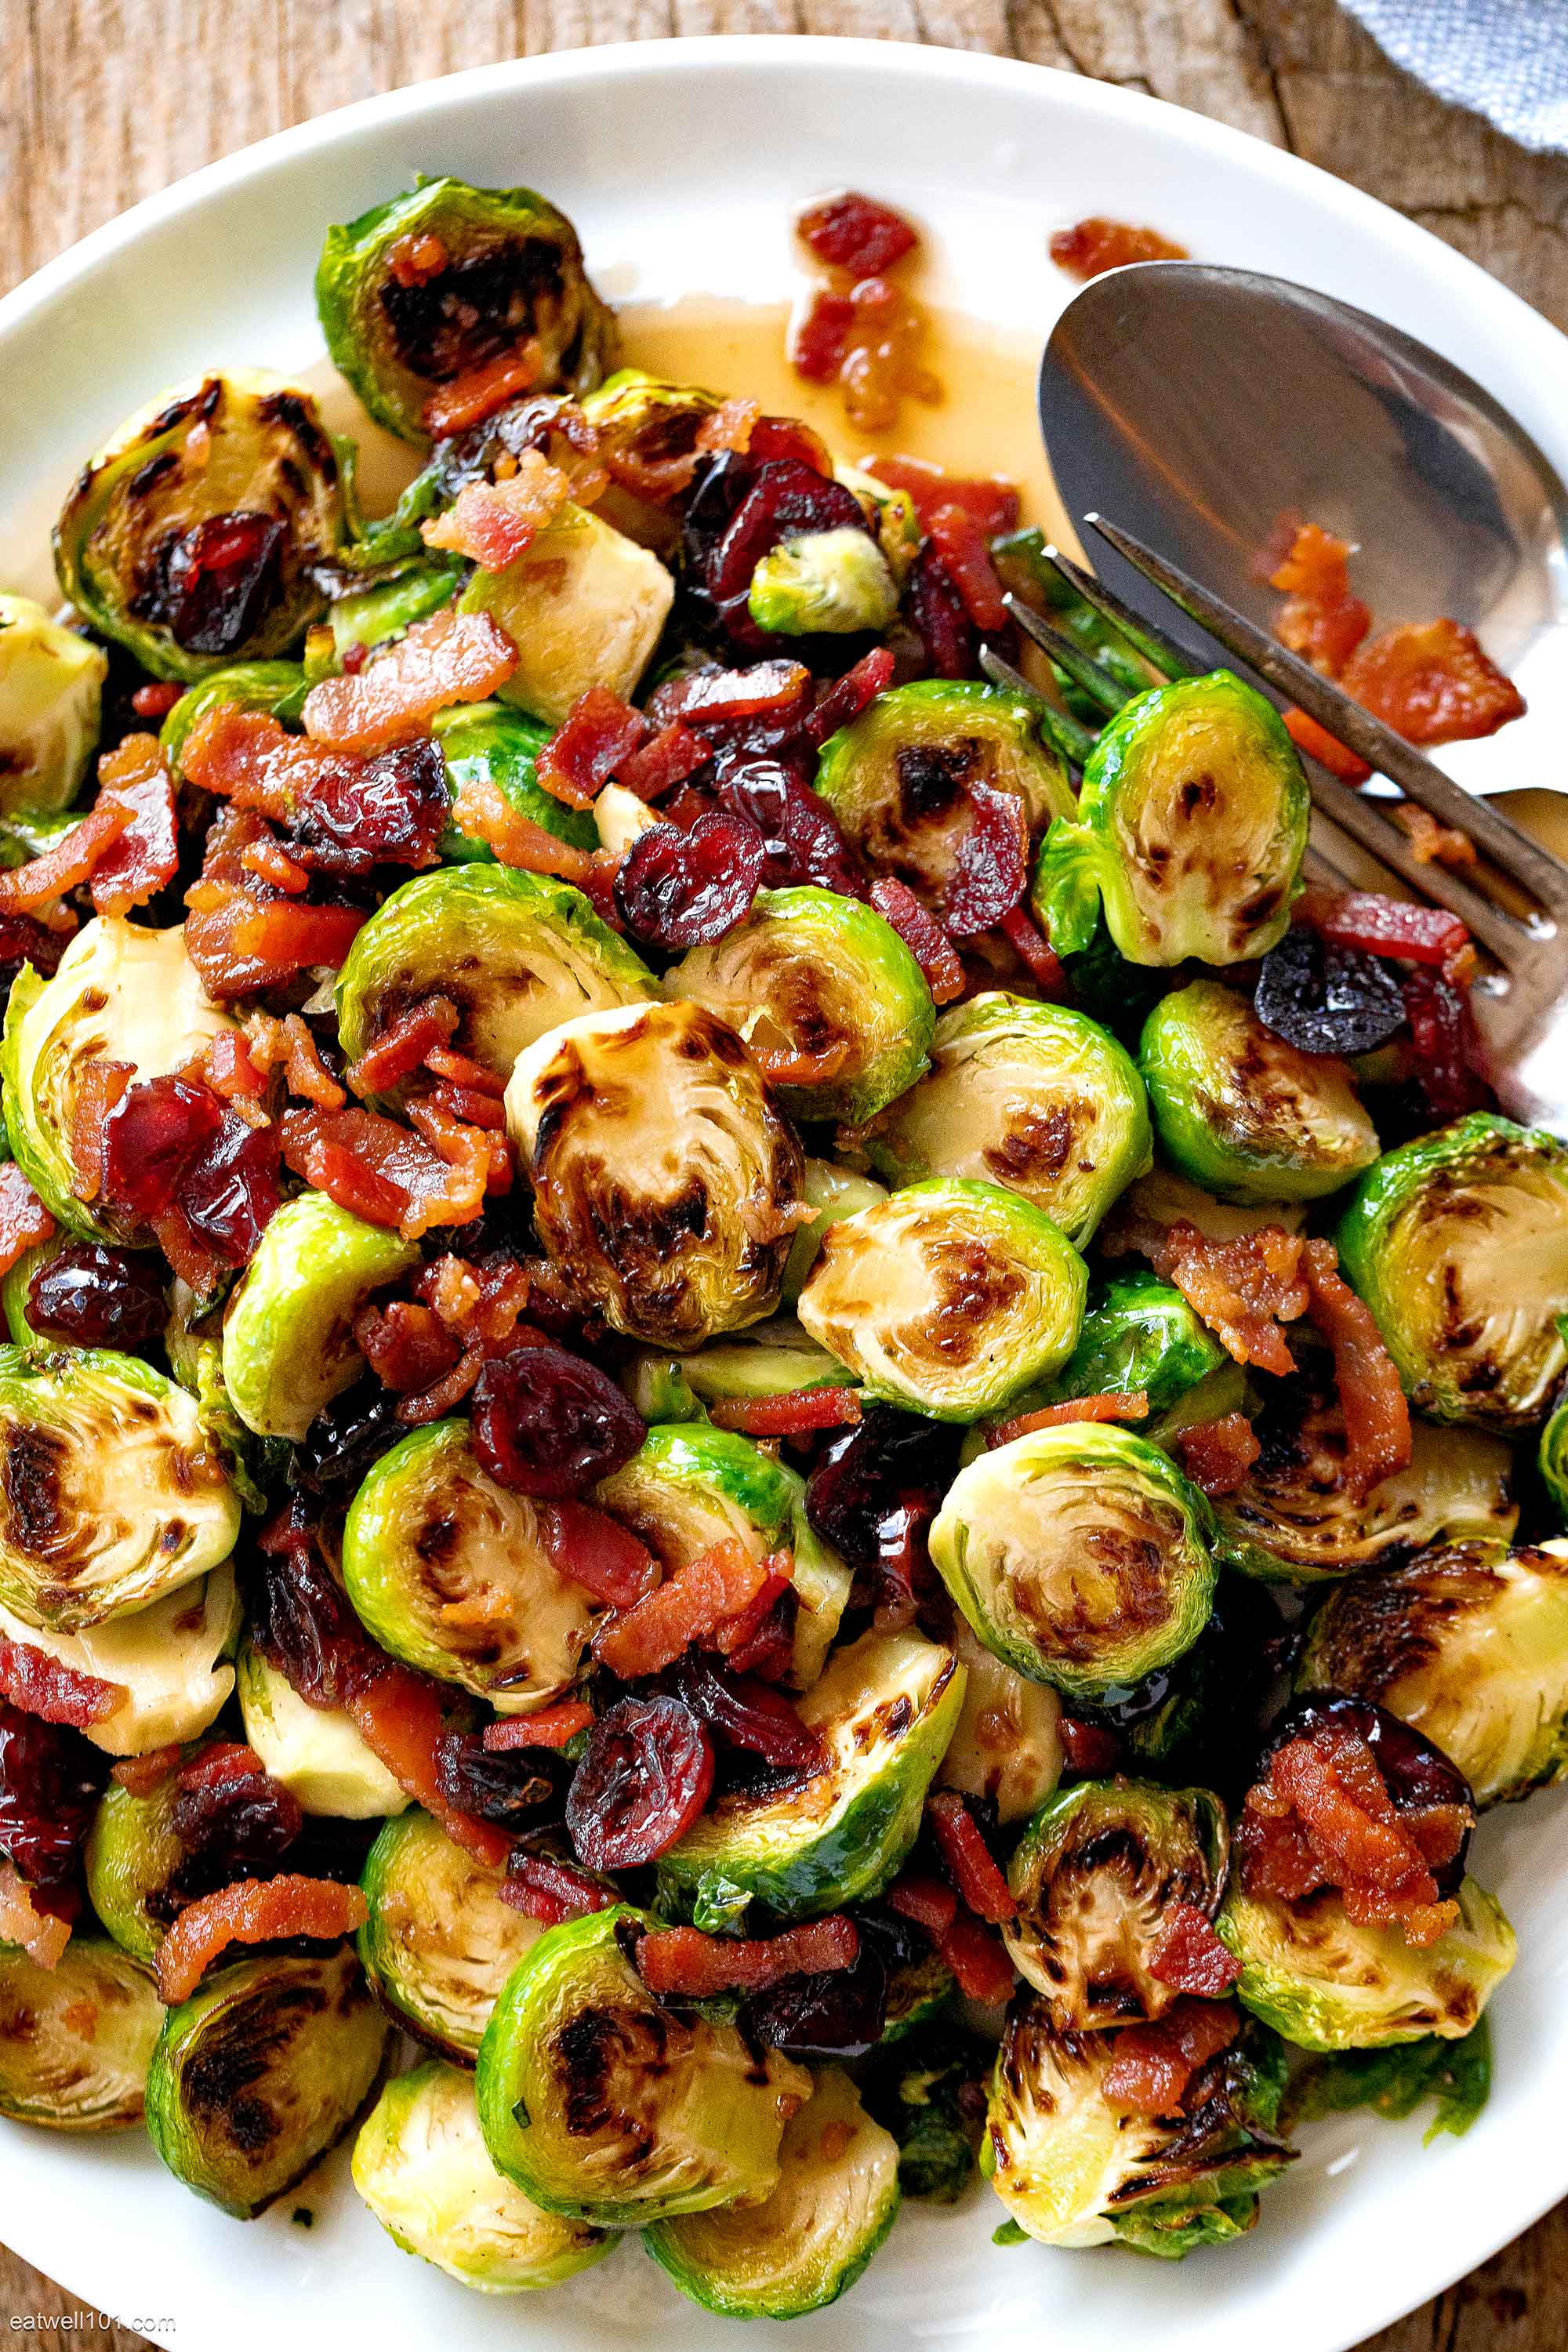 Roasted Brussels Sprouts With Maple Bacon And Cranberries Roasted Brussels Sprouts Recipe